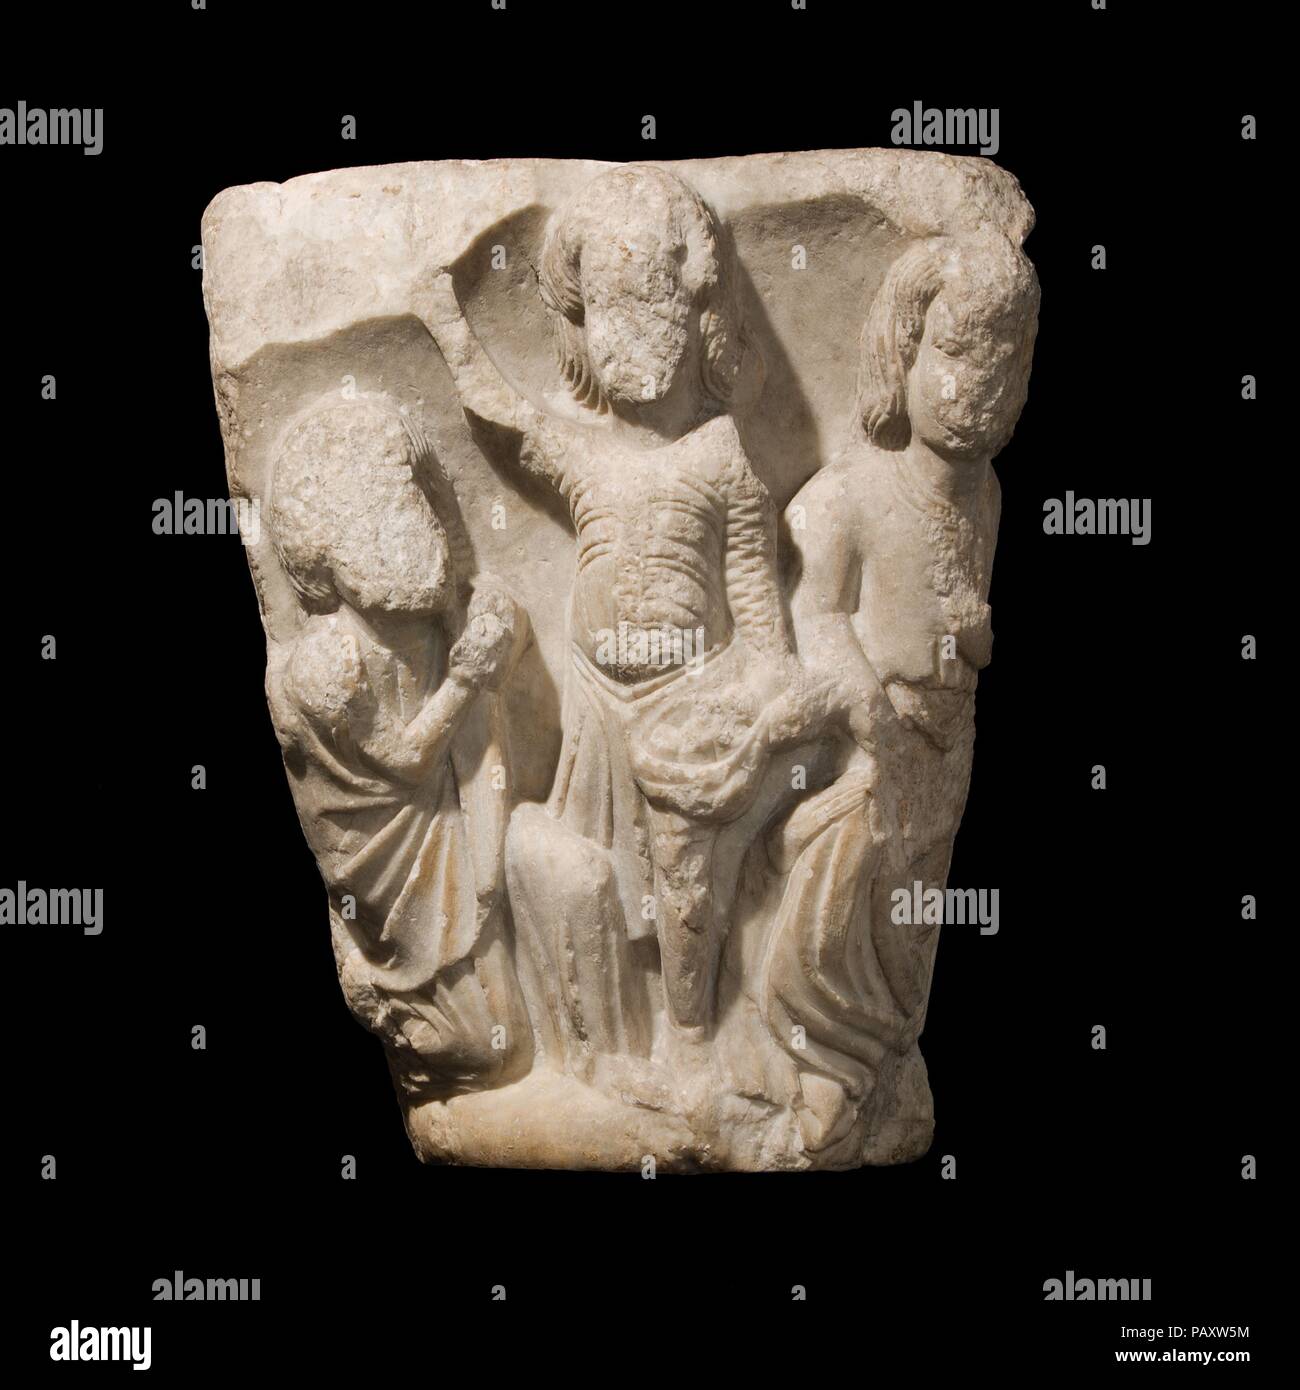 Double Capital Fragment with the Stoning of St. Stephen. Culture: French. Dimensions: 15 1/4 × 12 1/2 × 9 1/4 in. (38.7 × 31.8 × 23.5 cm). Date: 12th Century. Museum: Metropolitan Museum of Art, New York, USA. Stock Photo